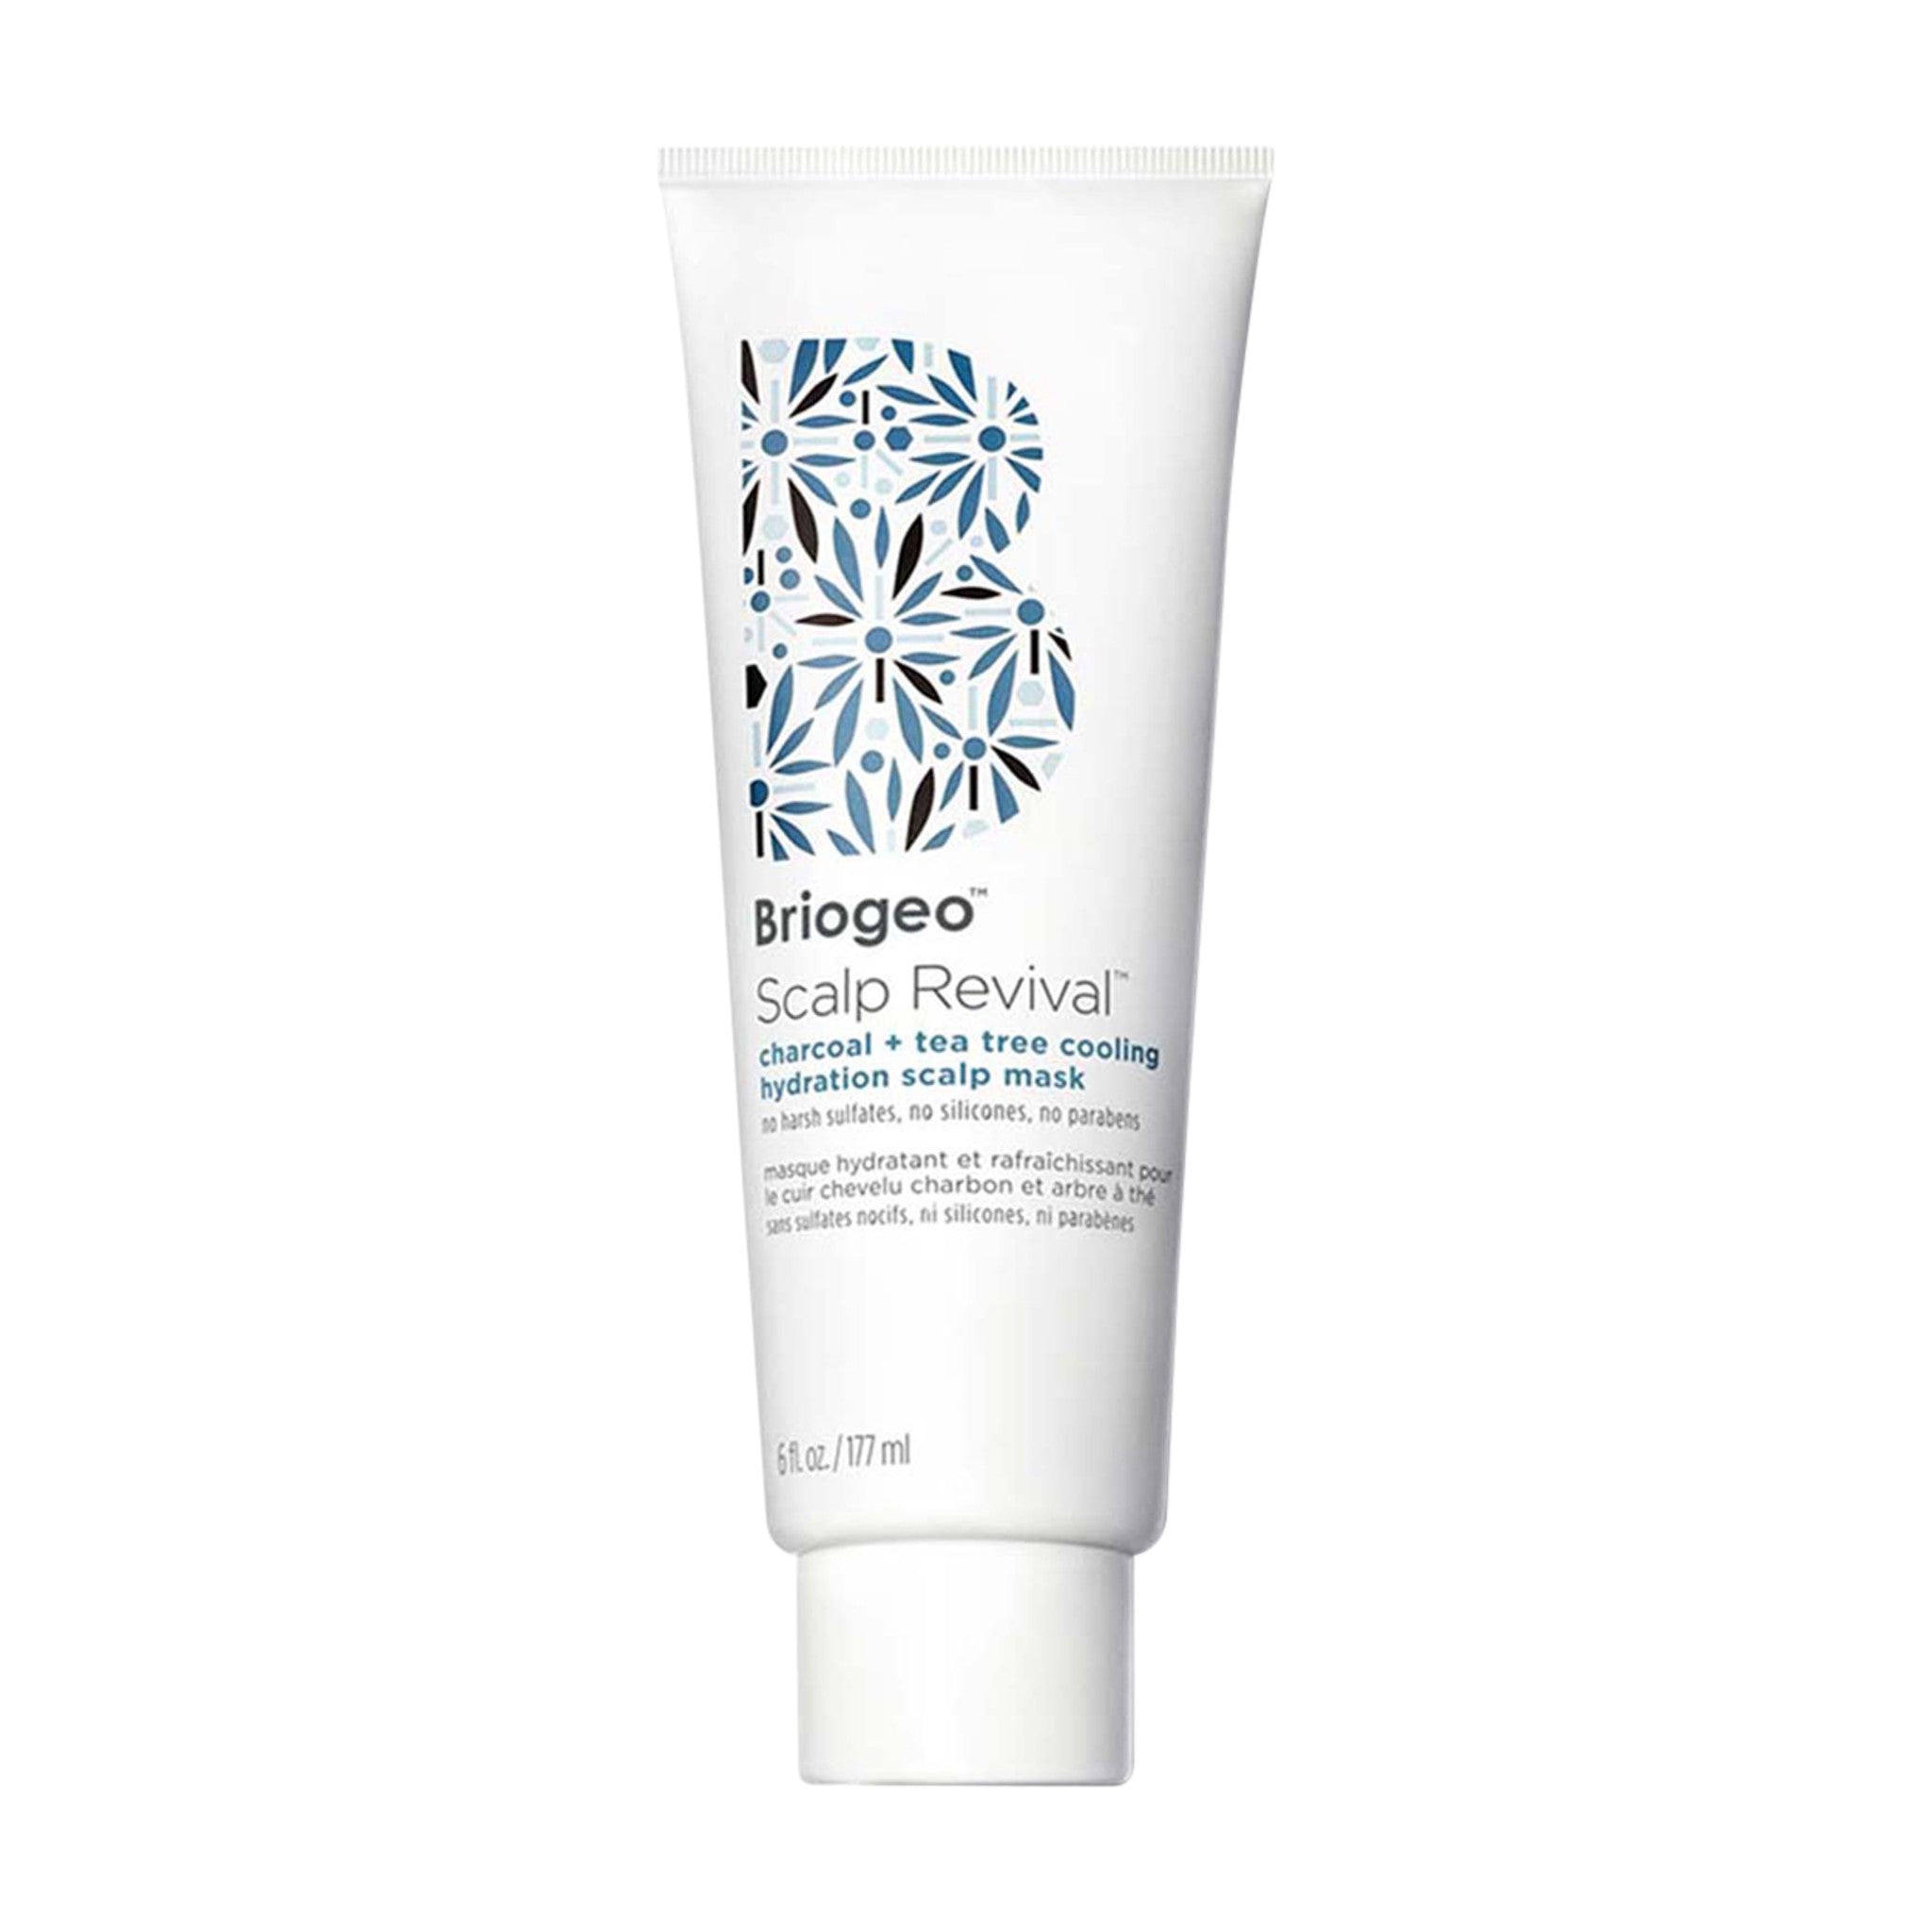 Briogeo Scalp Revival Charcoal and Tea Tree Cooling Hydration Mask main image.